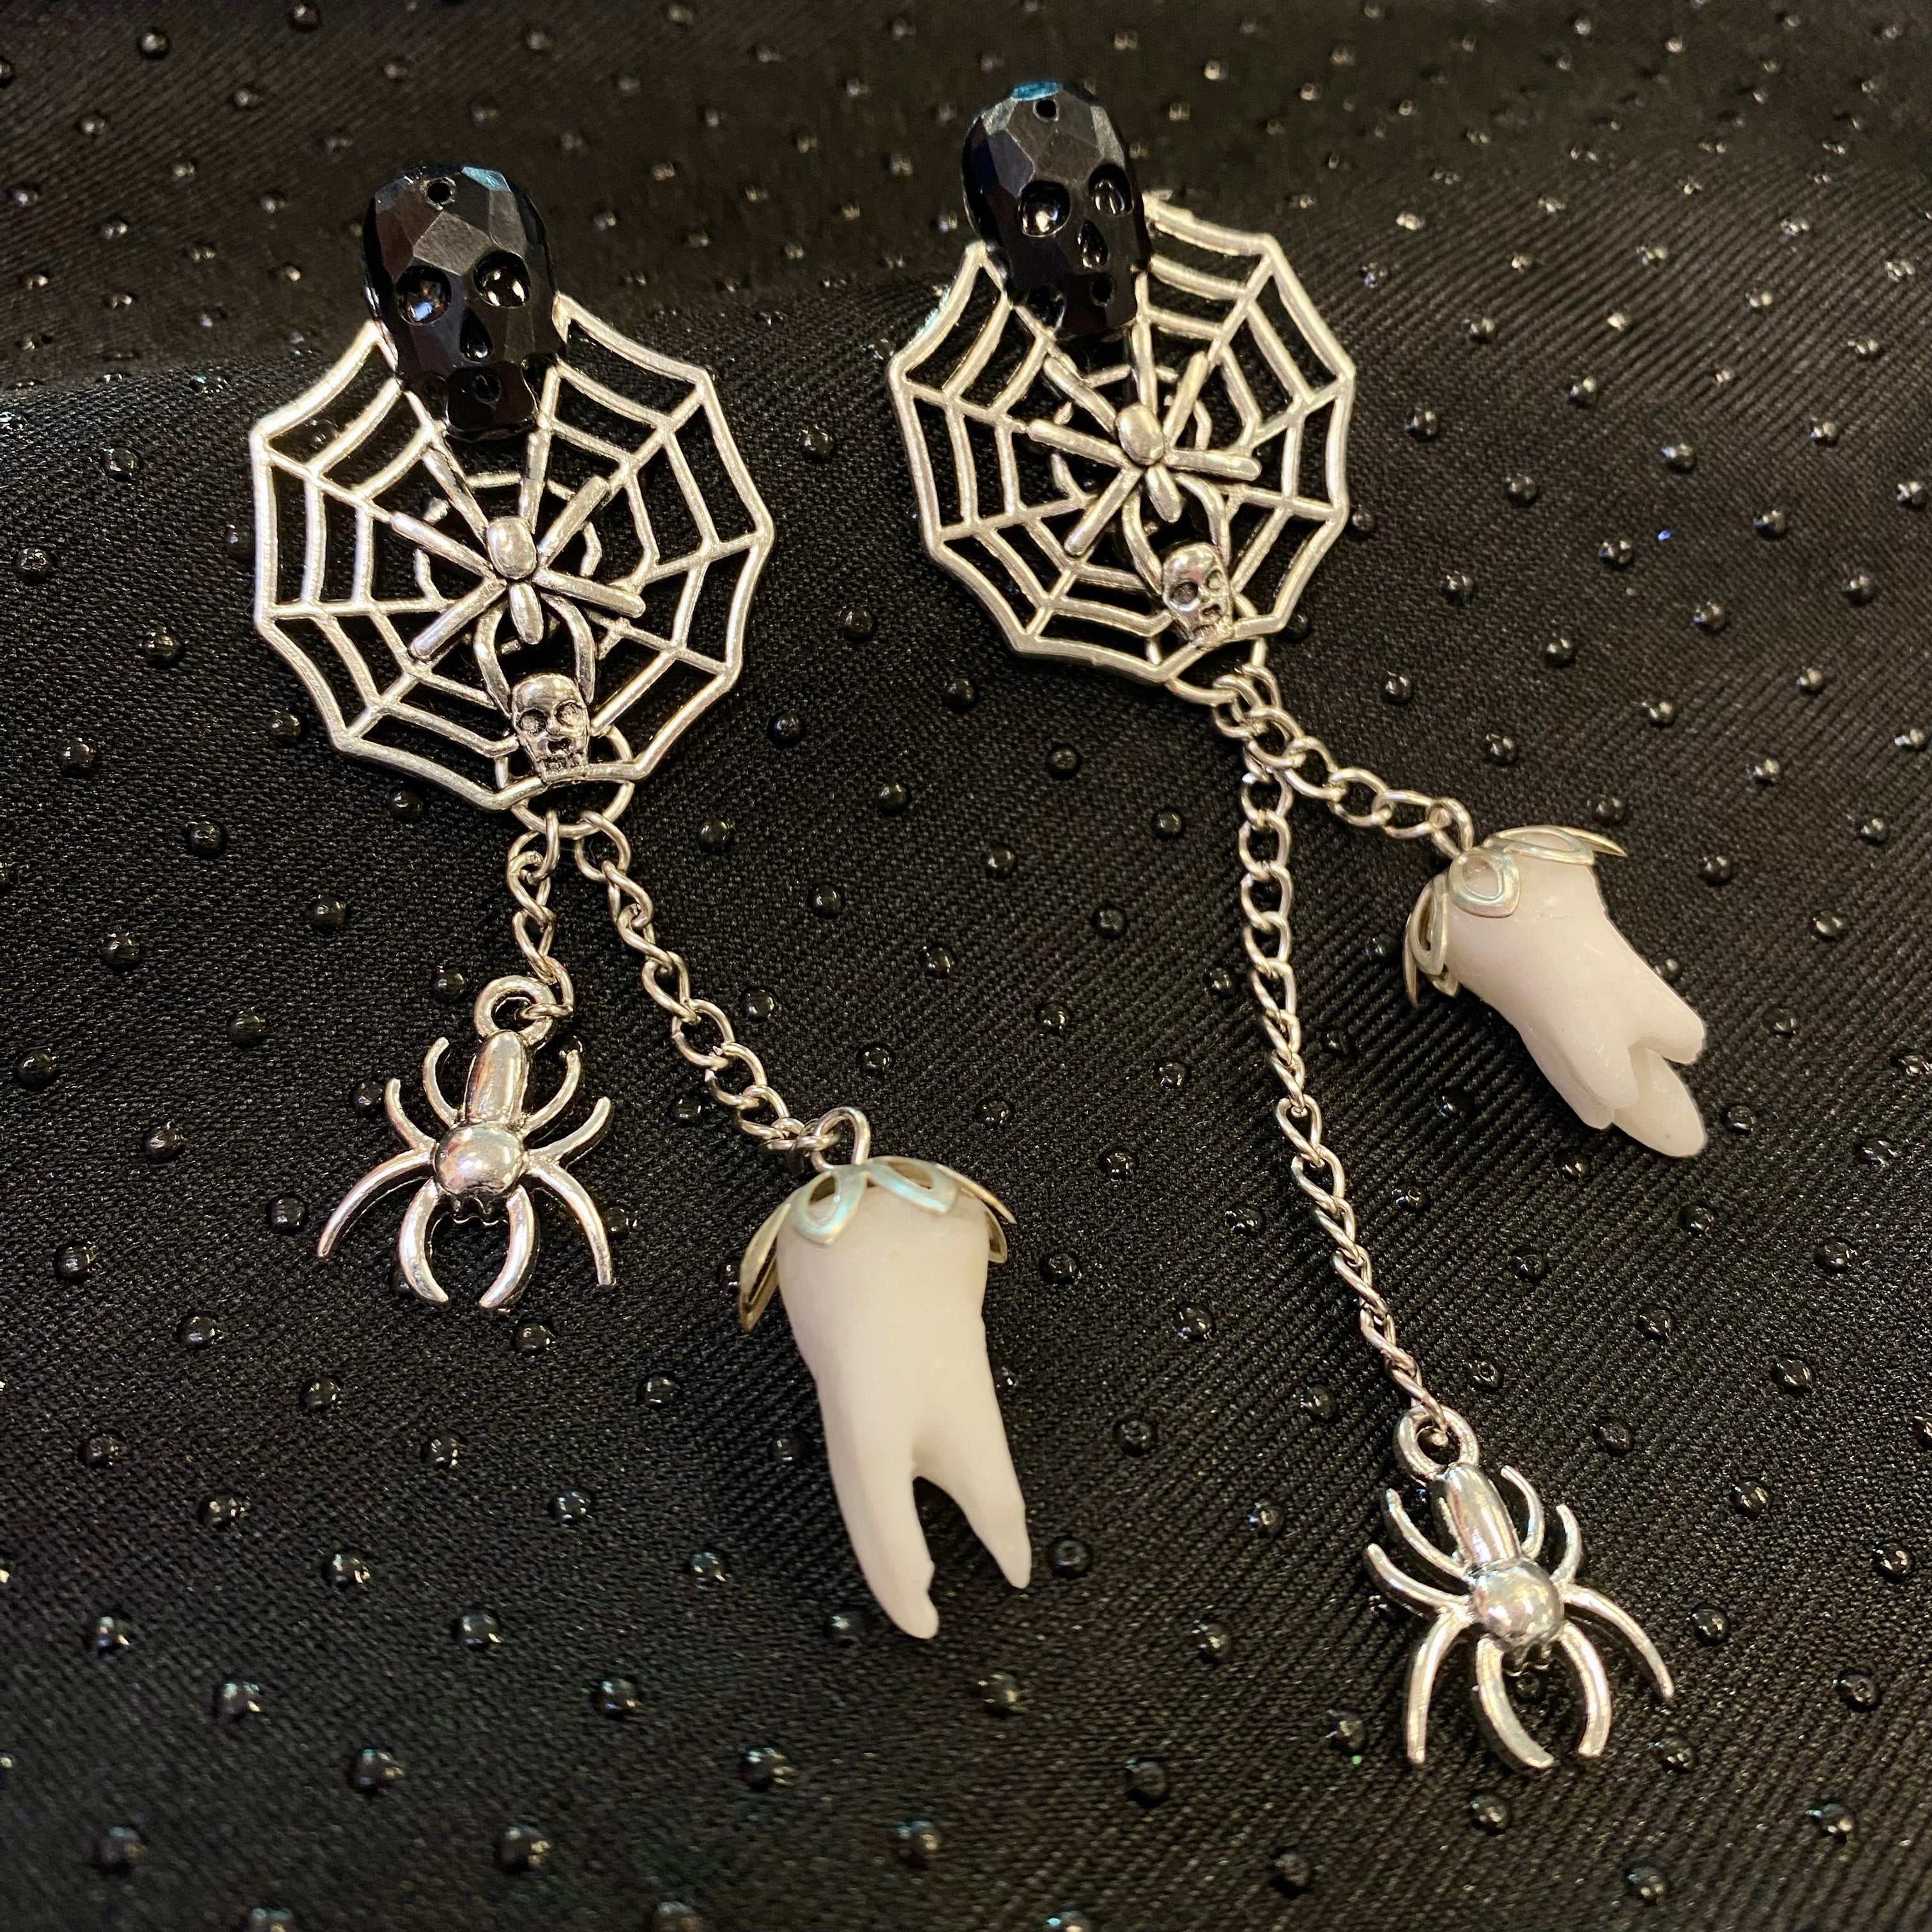 Spider Tooth Earrings